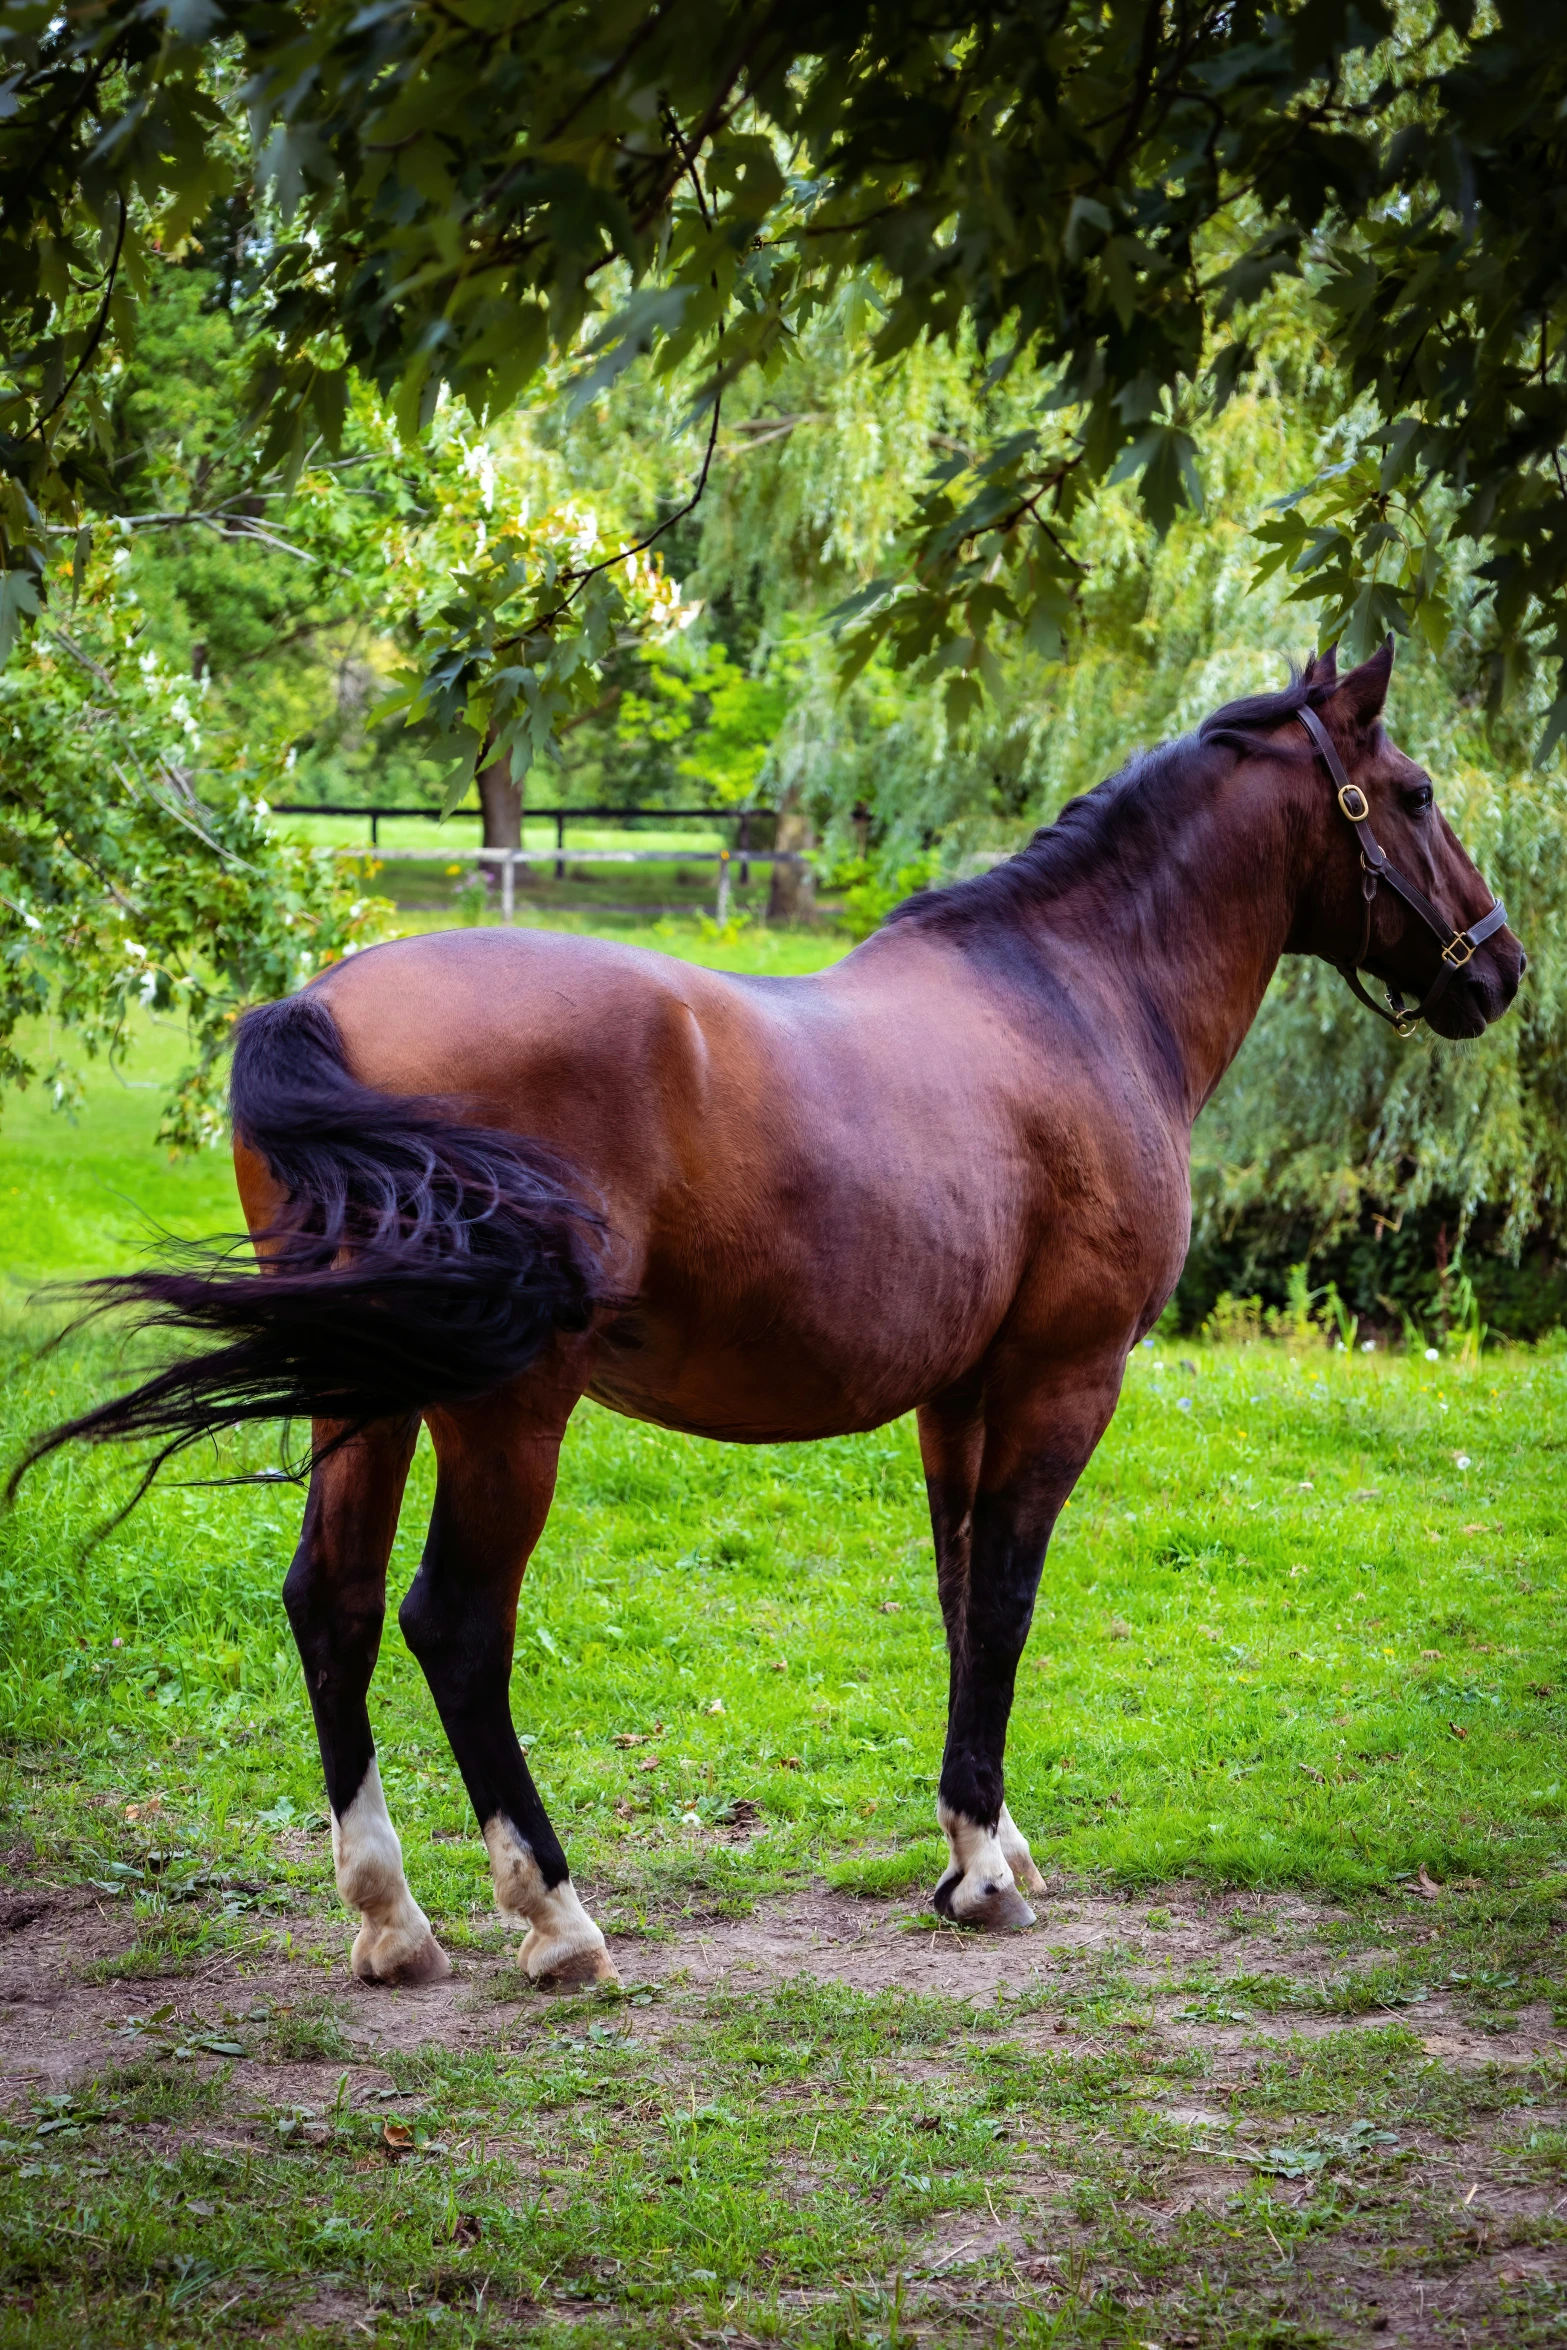 a horse standing in a grassy field next to trees